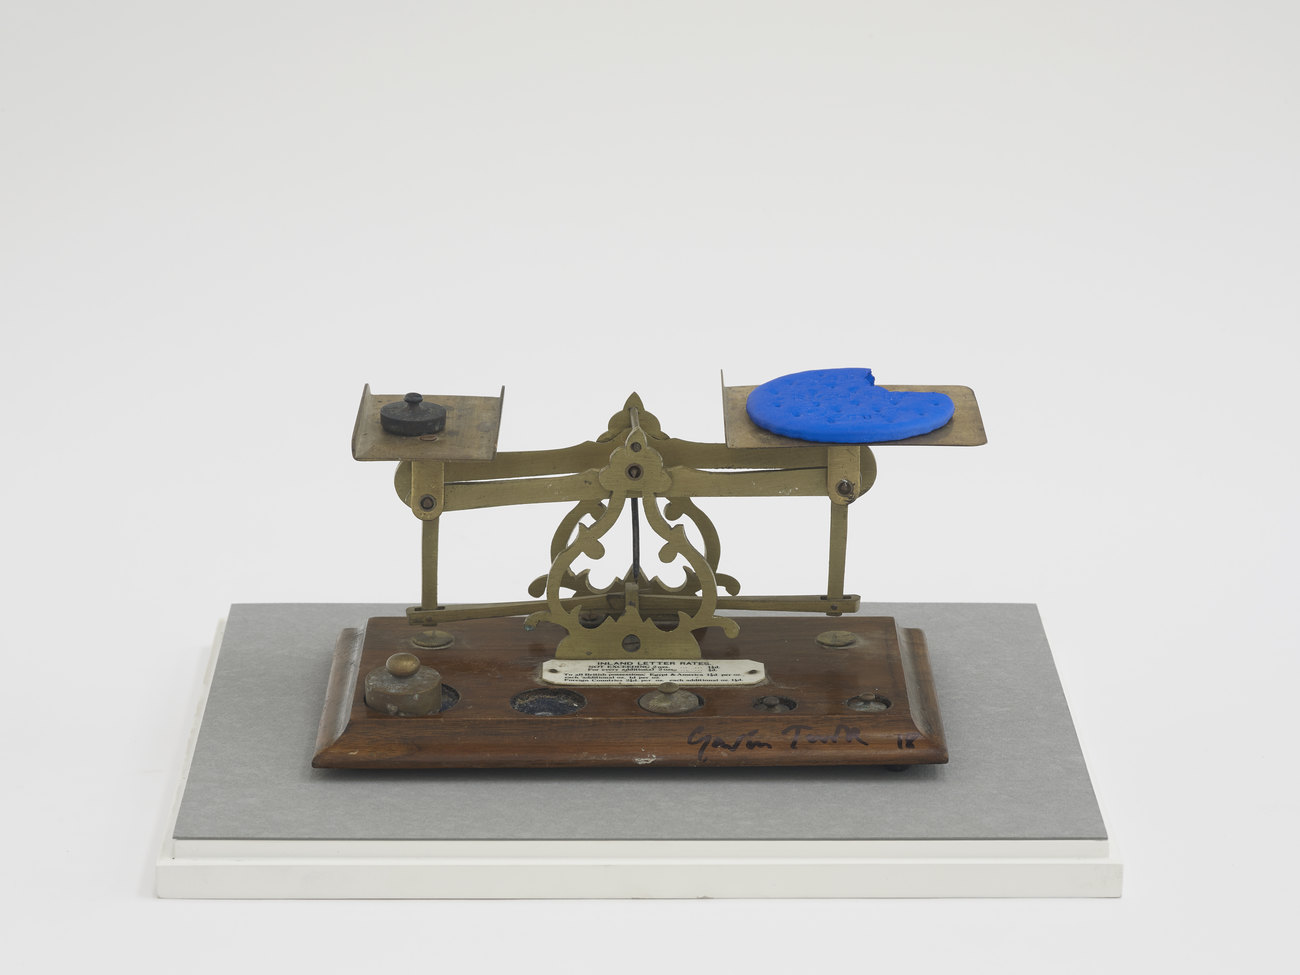 An image shows a blue biscuit balancing on a weighing scale 